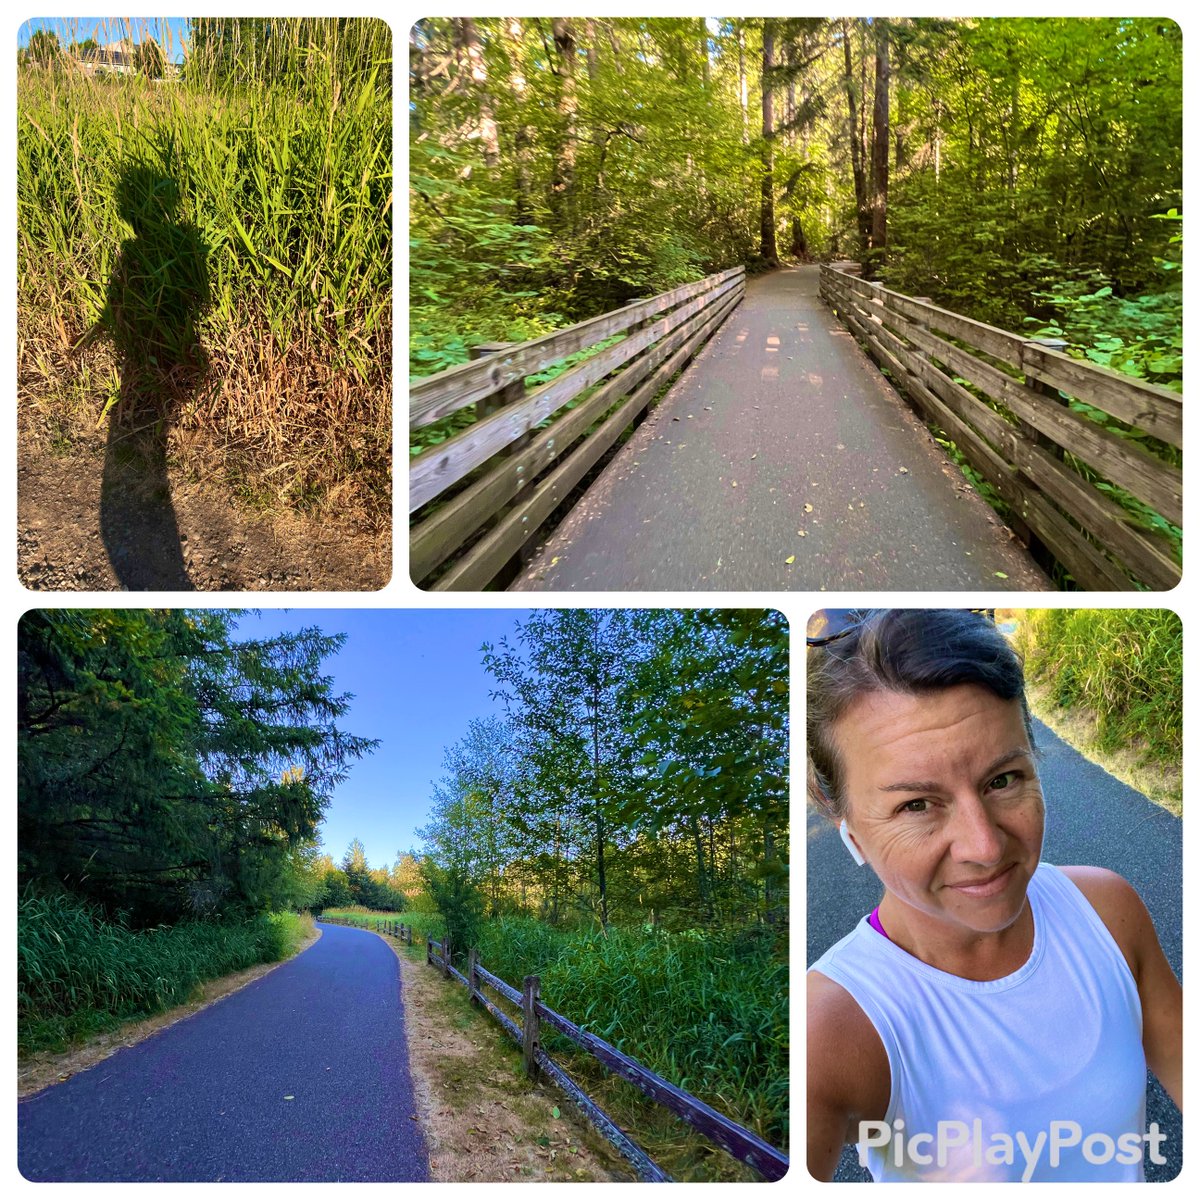 A nature walk is the perfect recovery after M3S3 this morning! The four mile walk felt good. #SundayMotivation #MPC2023 #Peaker #nature @naturepeakers @MyPeakChallenge